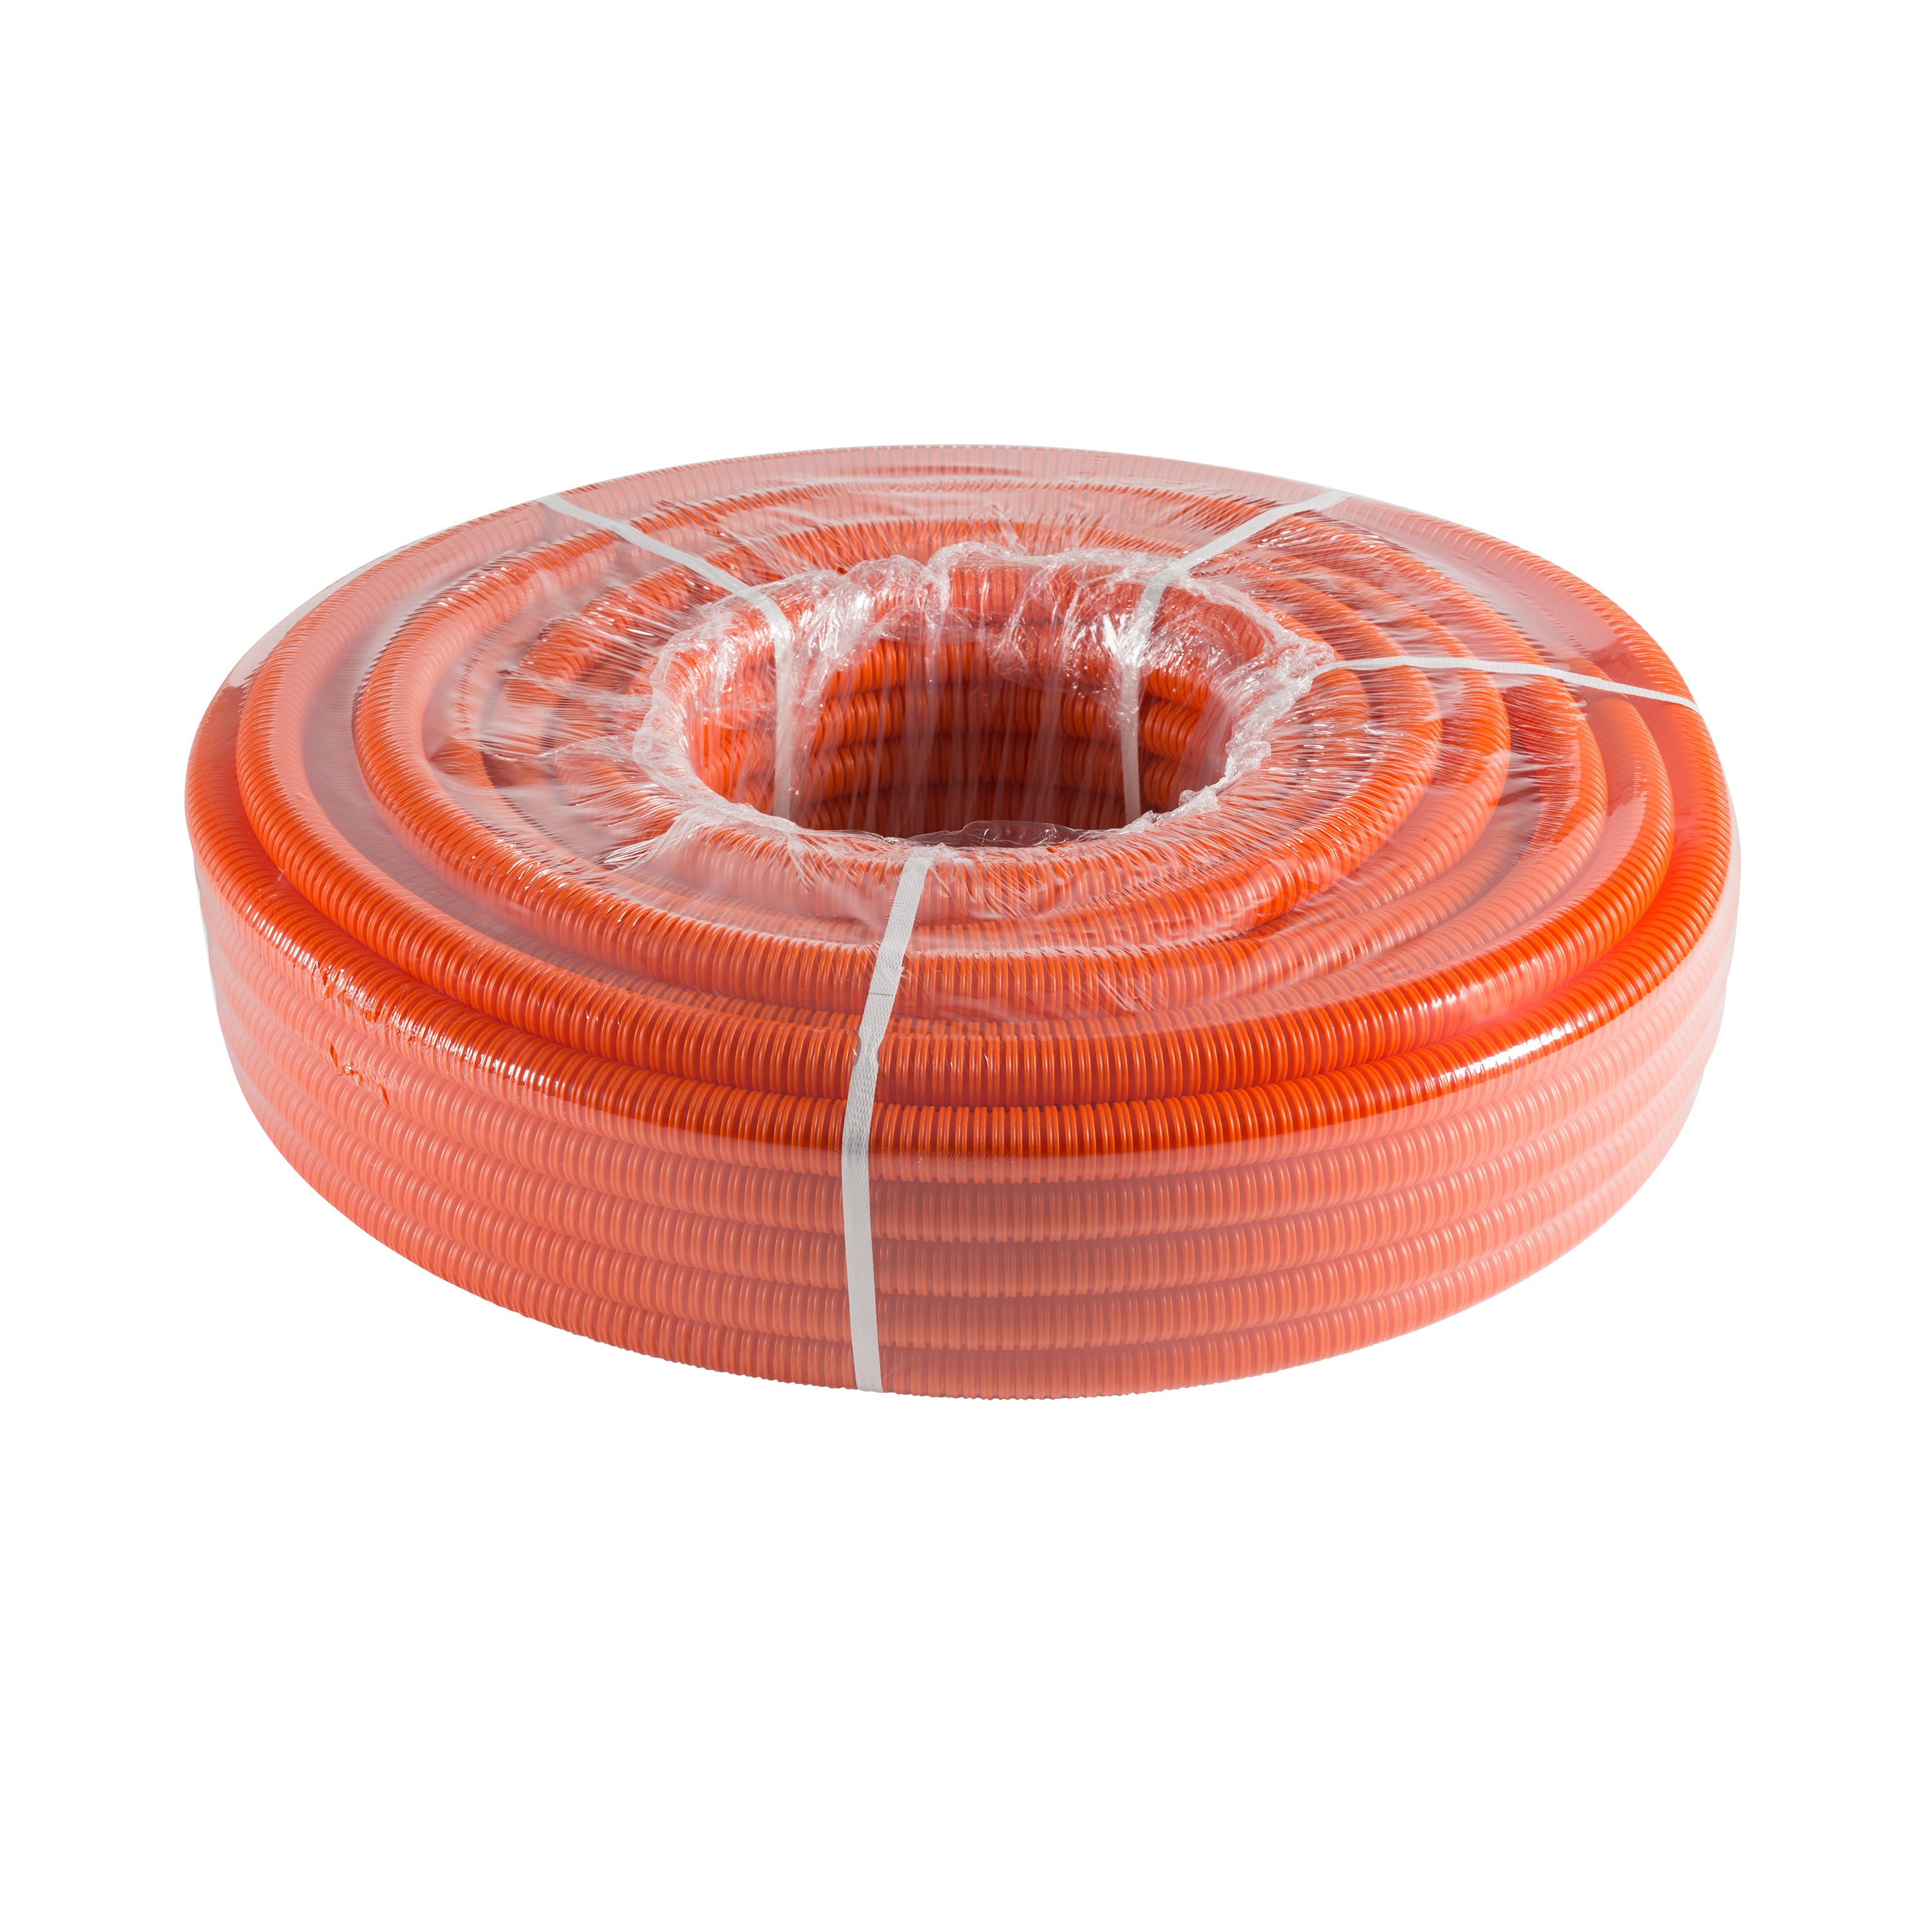 Direct Connect, DCPC100-H250 DirectConnect™, 1" Conduit, 250', w/Pull String. Orange HDPE, for Low Voltage Wire